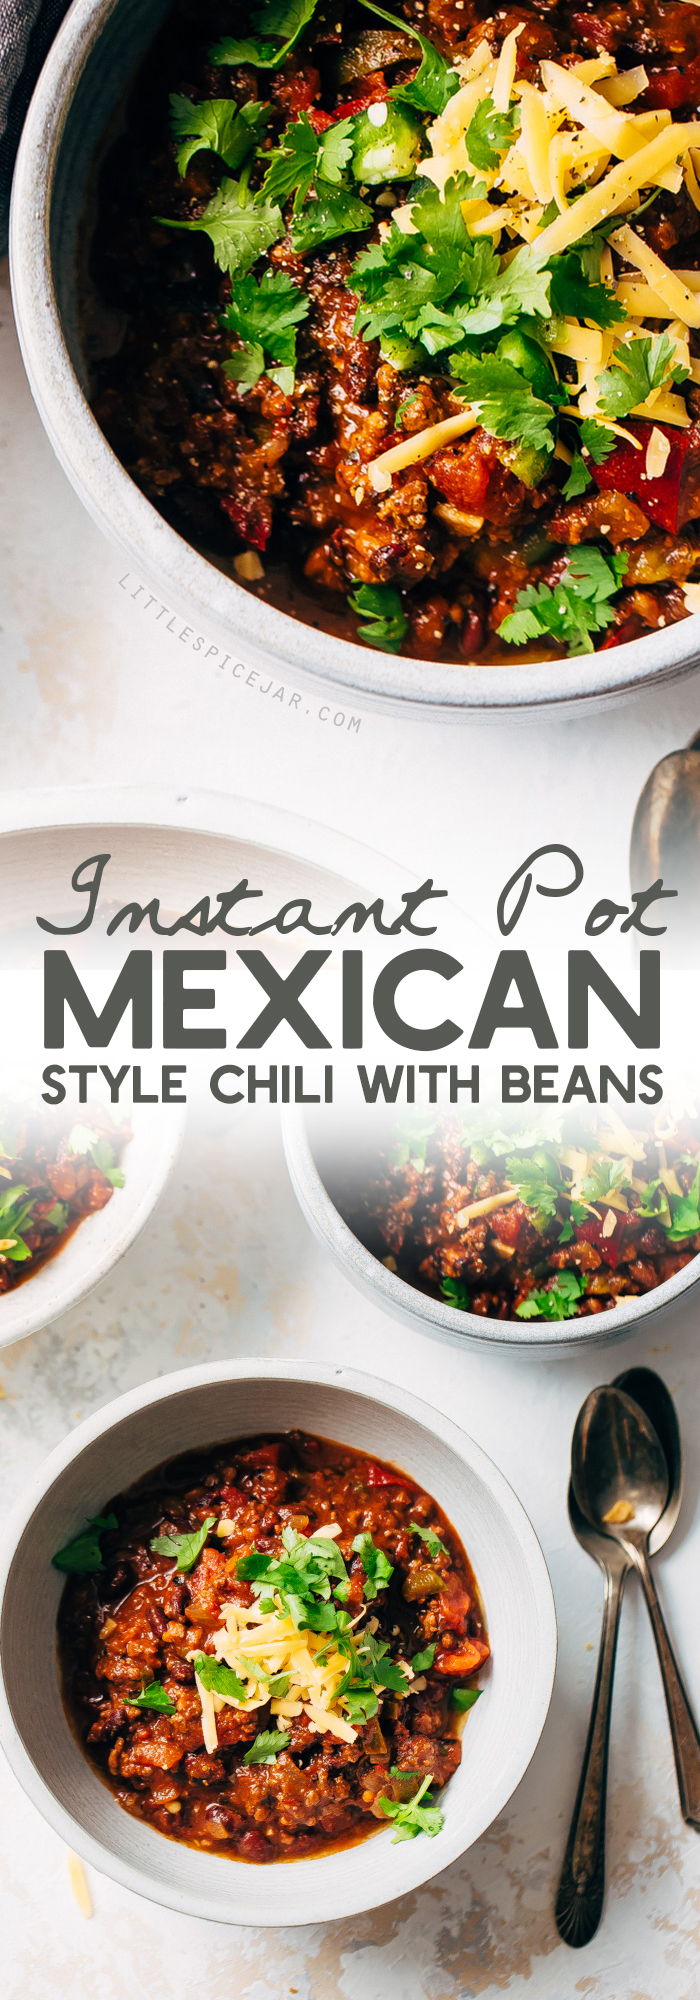 Spicy Instant Pot Mexican Chili with Black Beans Recipe - A homemade chili that tastes slow simmered but takes 40 minutes to make from start to finish! #instantpot #instantpotchili #mexicanchili #chilirecipe | Littlespicejar.com